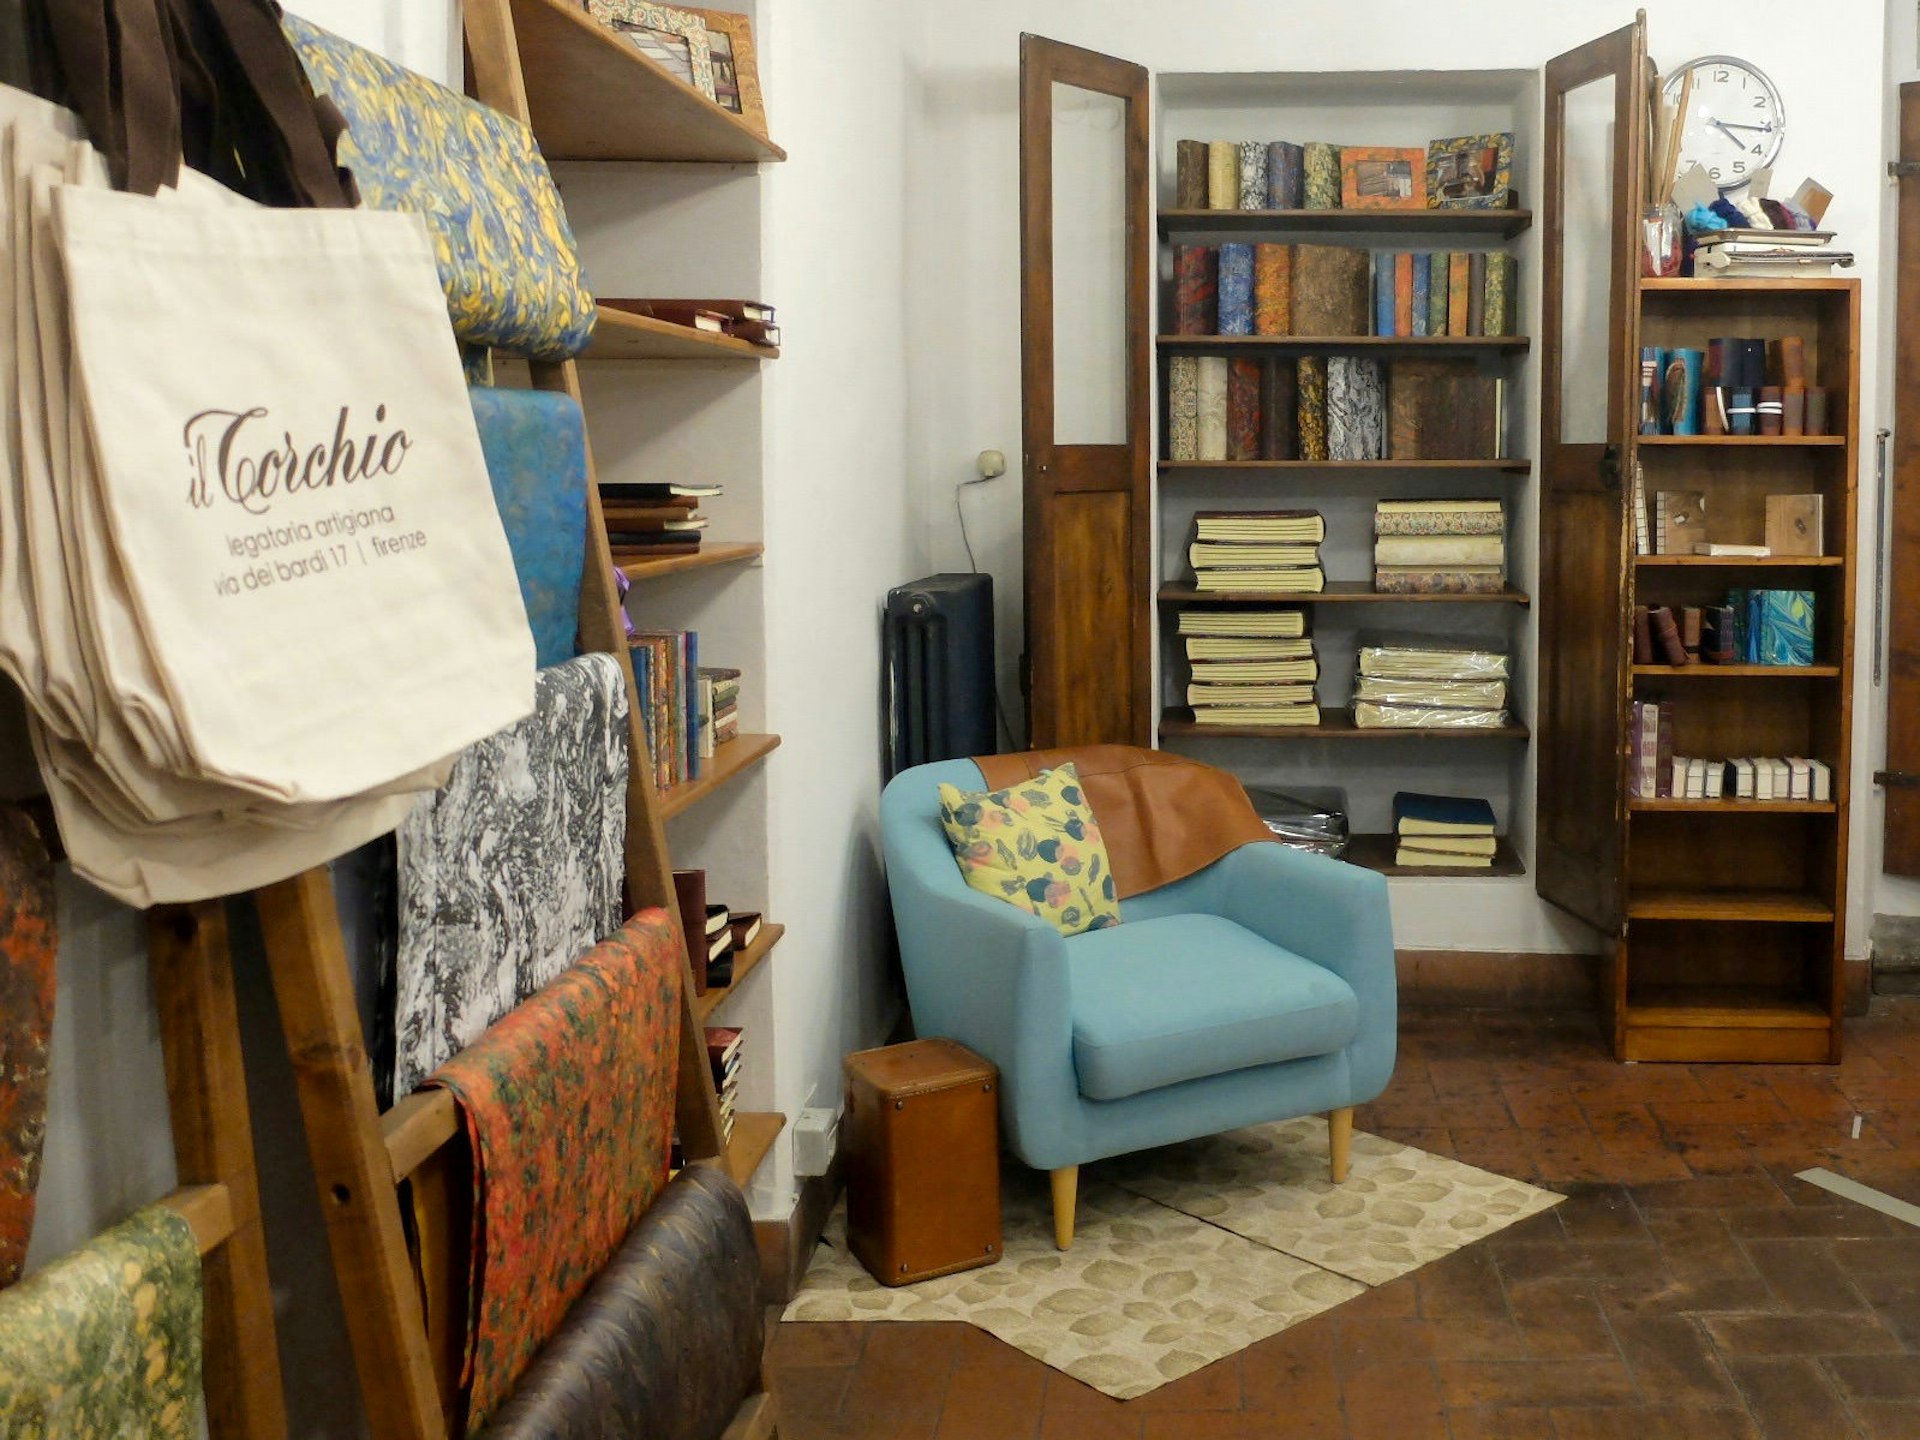 Il Torchio book binding and paper marbling shop © Georgette Jupe / Lonely Planet